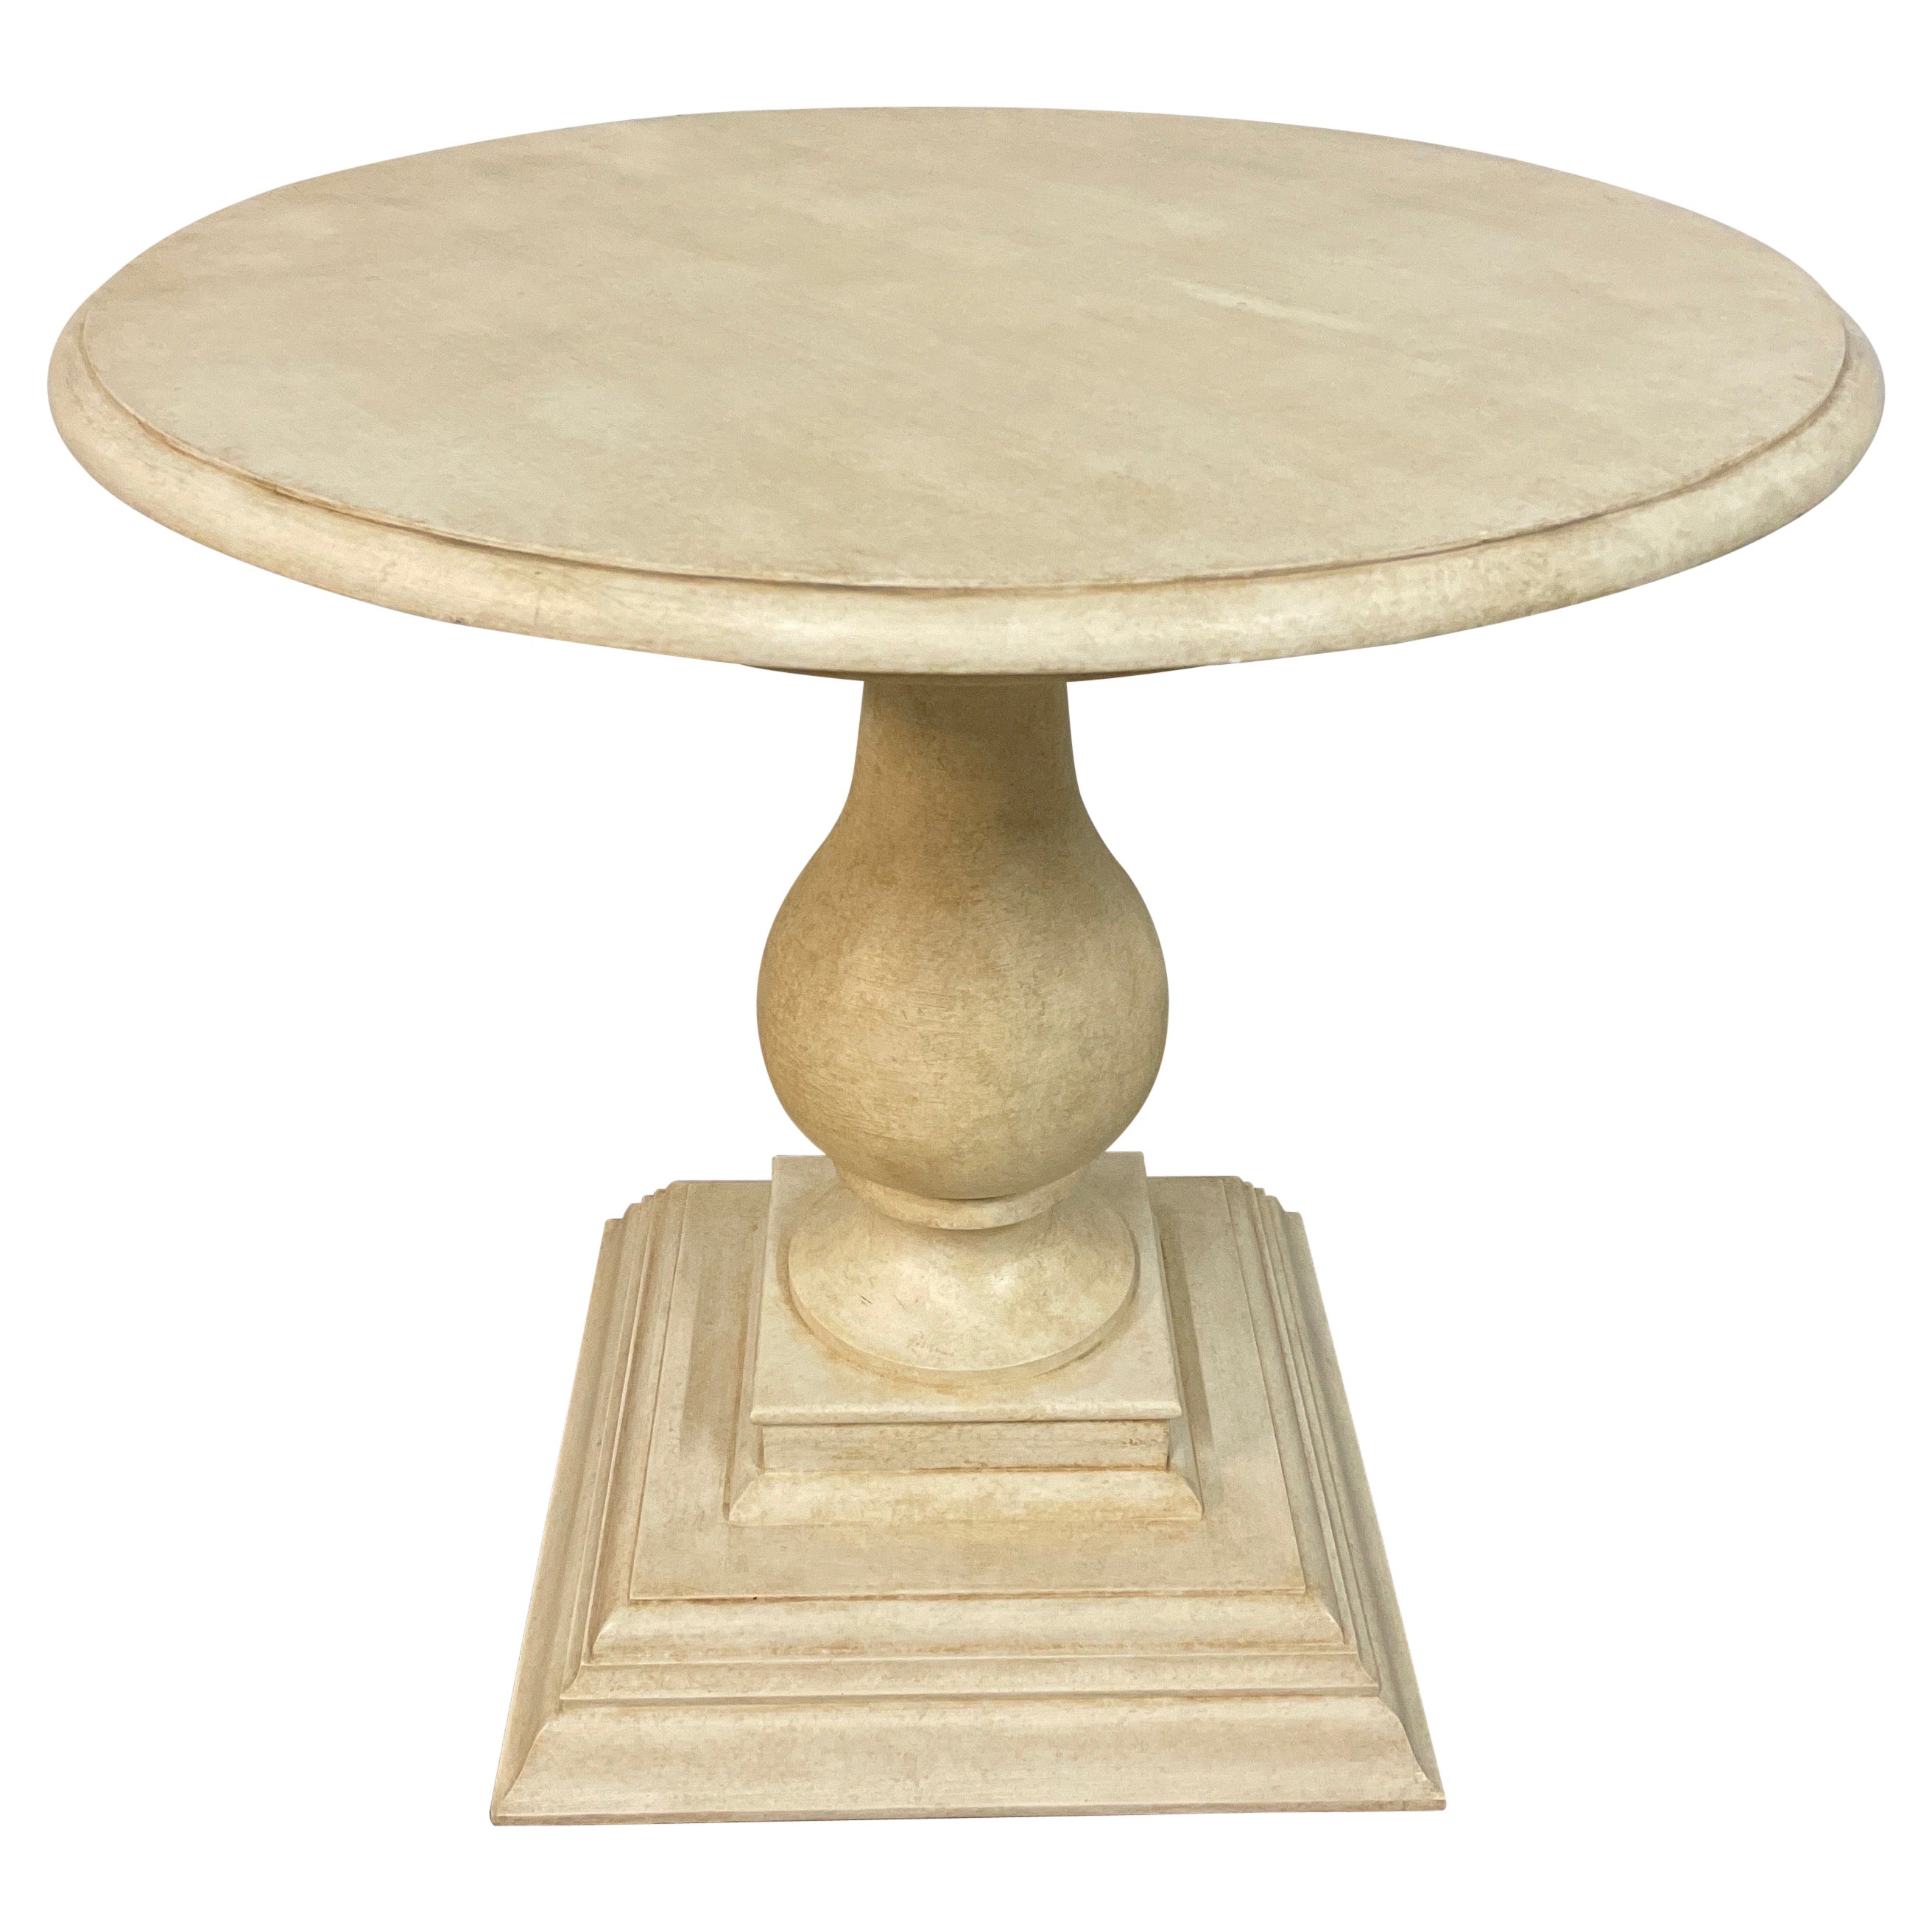 Neoclassical Painted Round Pedestal Table